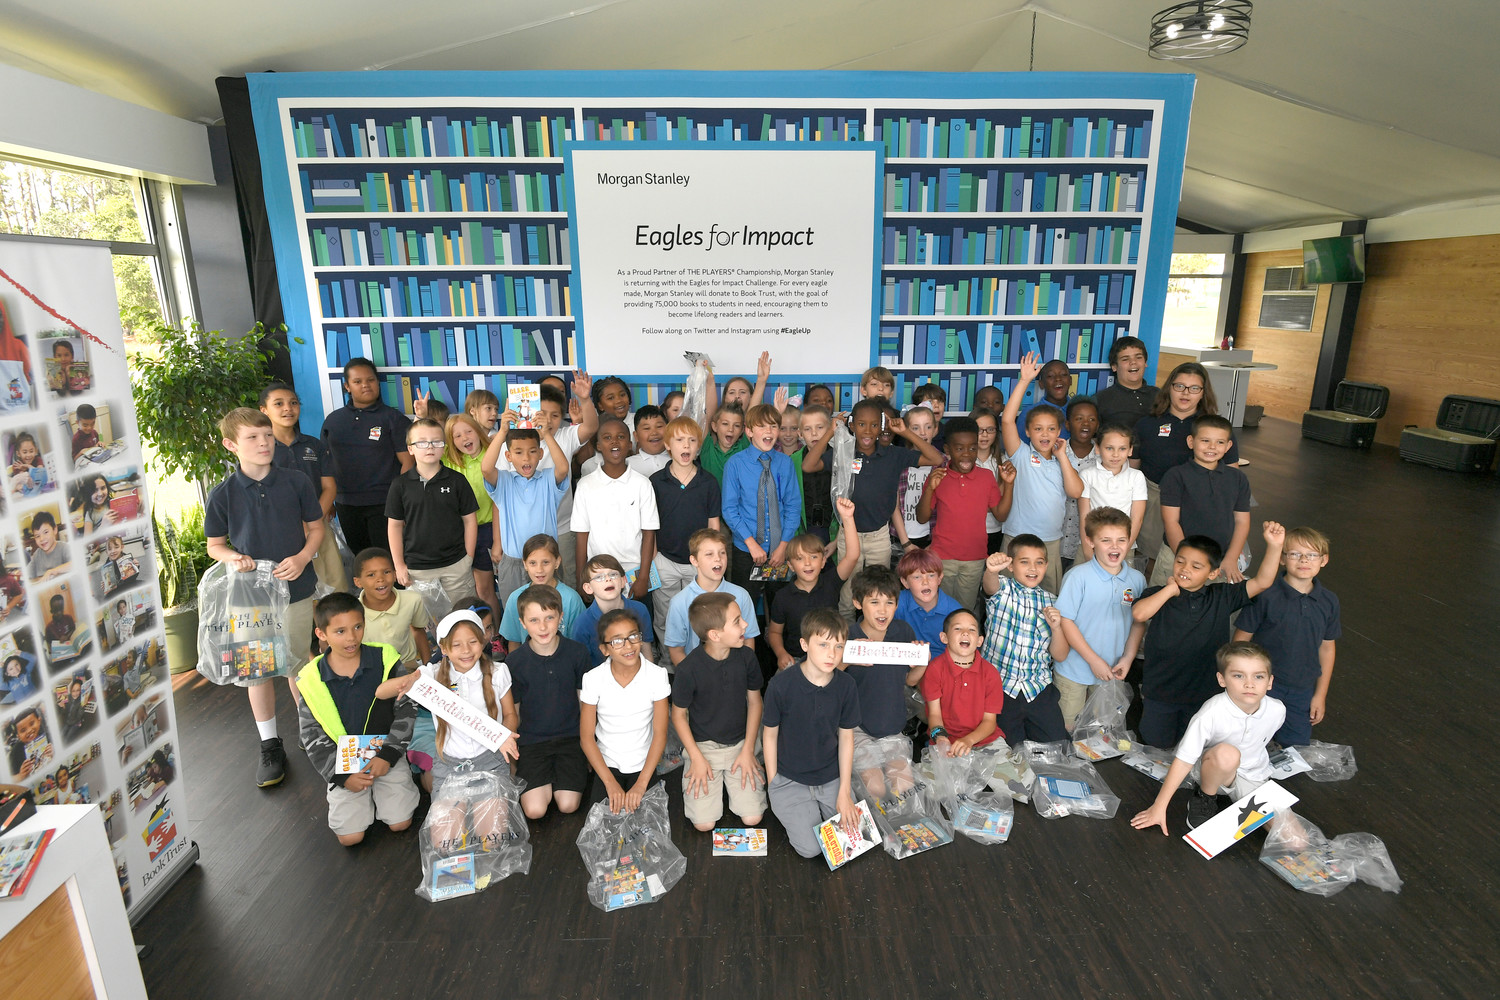 Morgan Stanley and Book Trust hosted a field trip for third-grade students from Mayport Elementary at THE PLAYERS Championship last Tuesday, May 8. During the visit, the students had a chance to participate in a book selection through Book Trust, interact with the state-of-the-art golf simulator and take a photo in the custom photo booth. Following the event, Morgan Stanley local employee volunteers joined a “Feed the Read” celebration at Mayport Elementary to deliver the books selected by the children.